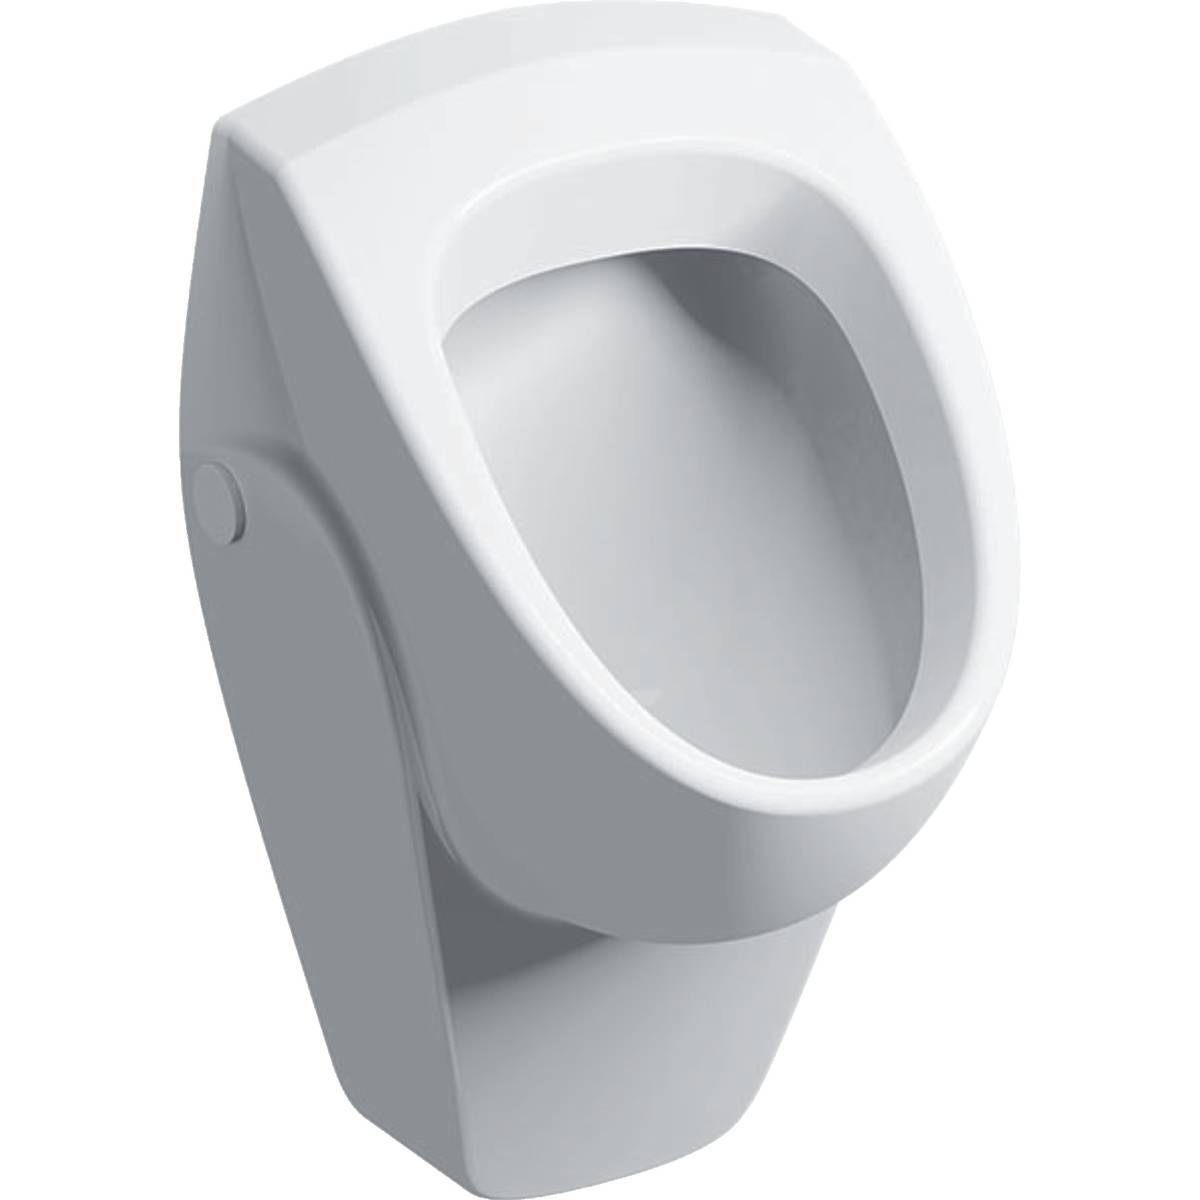 Selnova Urinal, Inlet from the Rear, Outlet to the Rear